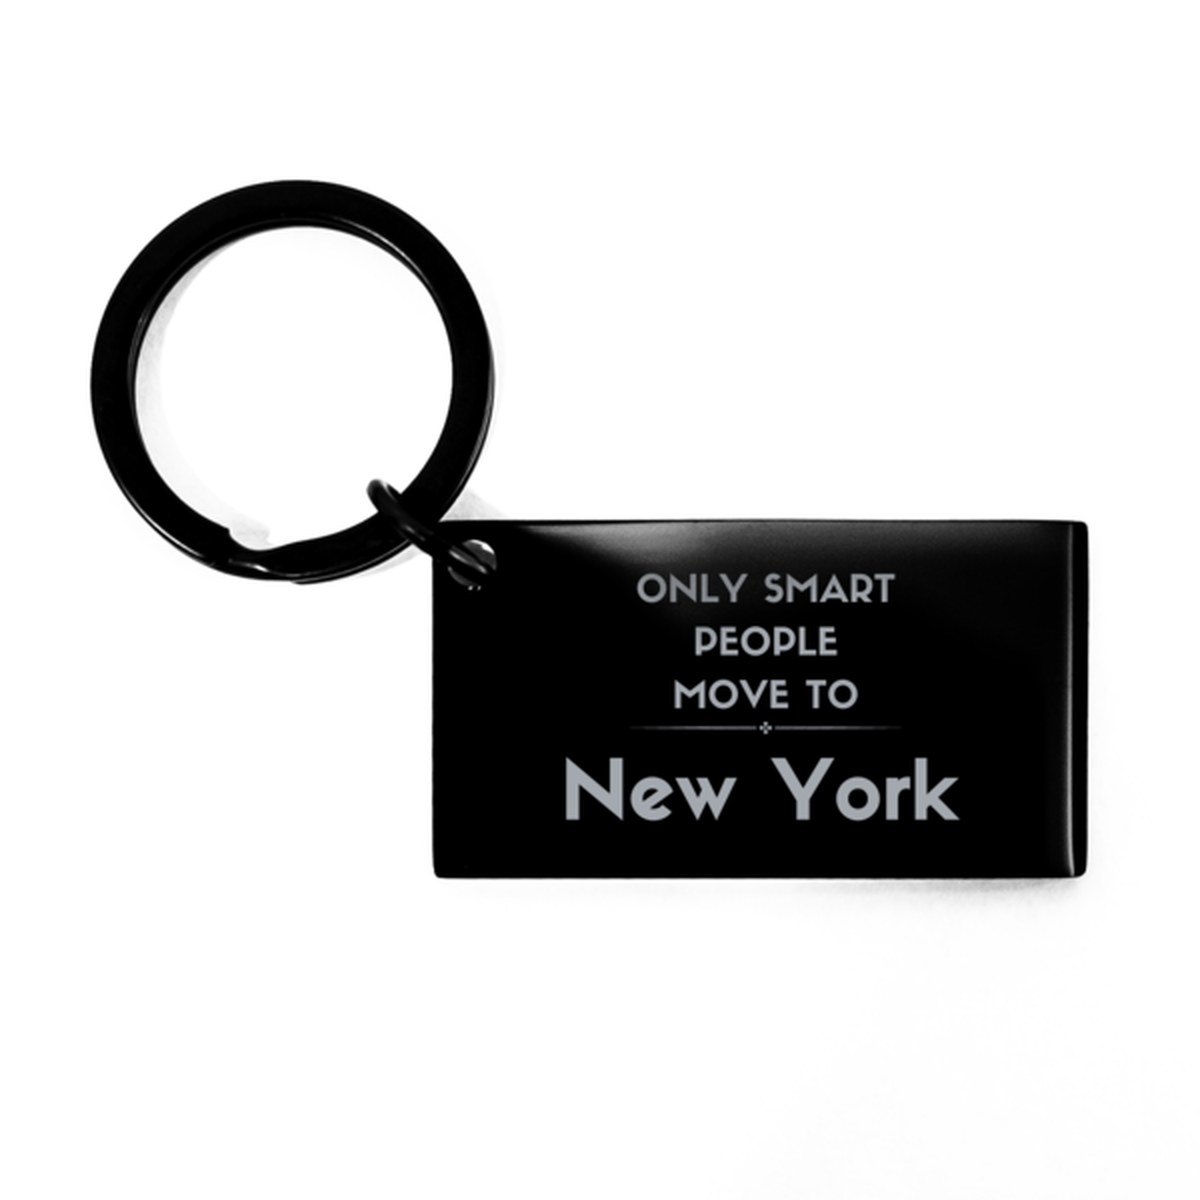 Only smart people move to New York Keychain, Gag Gifts For New York, Move to New York Gifts for Friends Coworker Funny Saying Quote